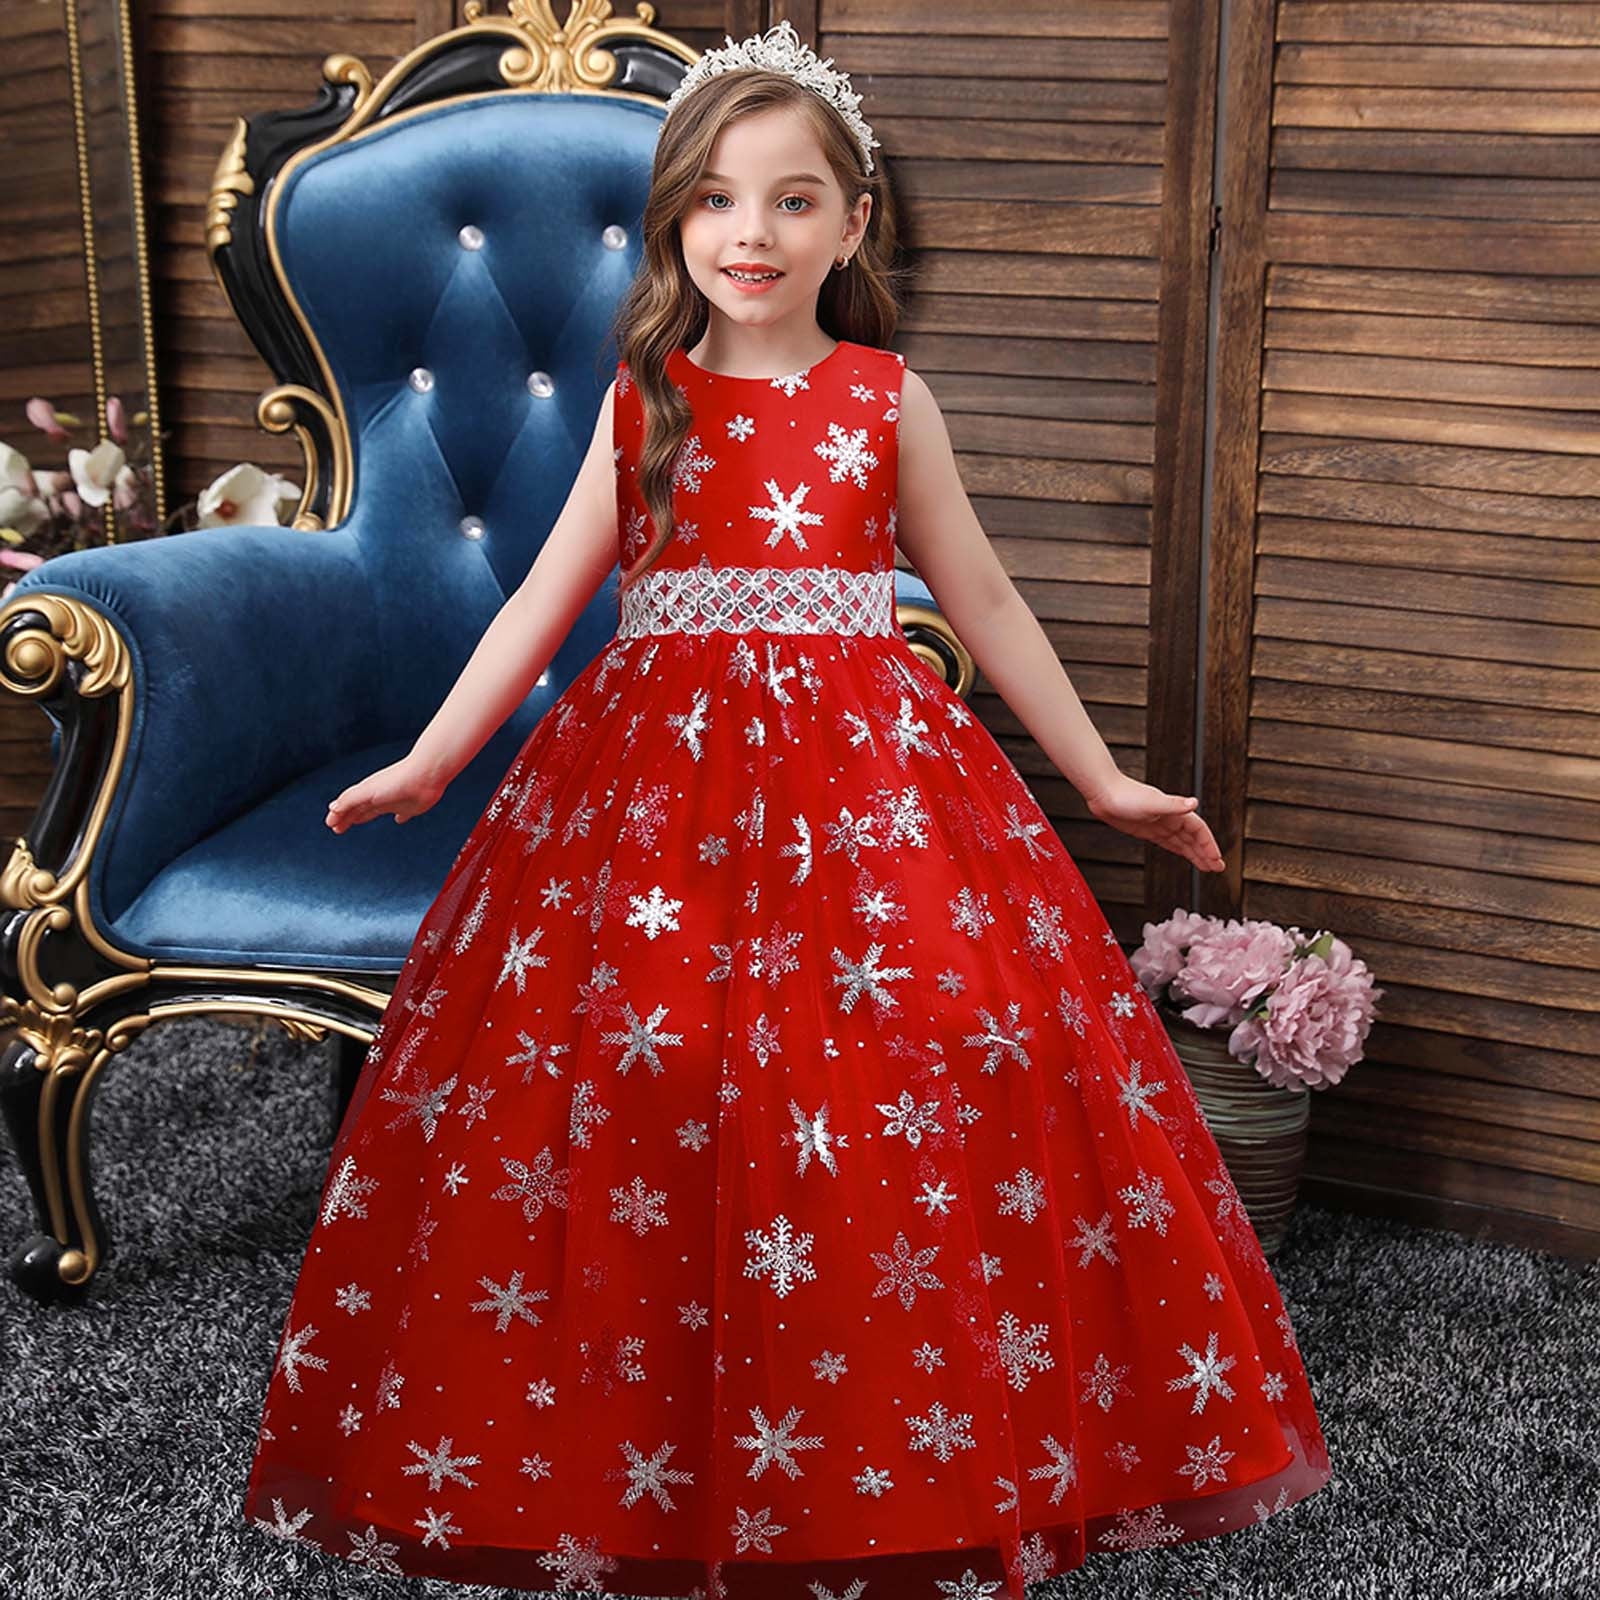 Red dress by magnes | Sewing Pattern | Dress patterns free, Party dress  patterns, Dress pattern